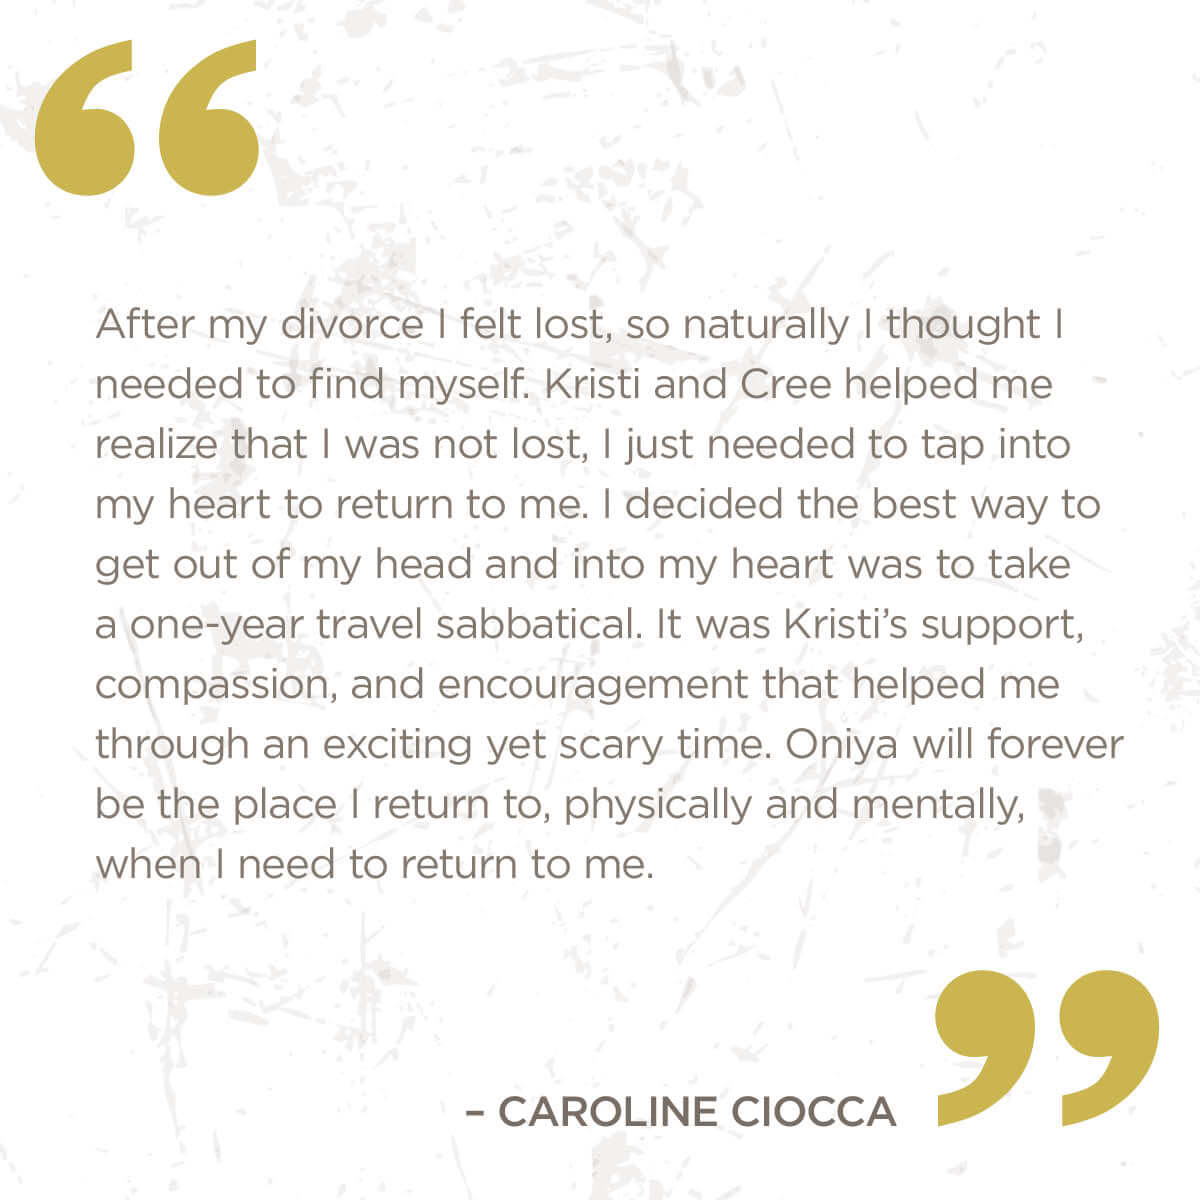 After my divorce I felt lost, so naturally I thought I needed to find myself. Kristi and Cree helped me realize that I was not lost, just needed to tap into my heart and return to me. I decided the best way to get out of my head and into my heart was to 